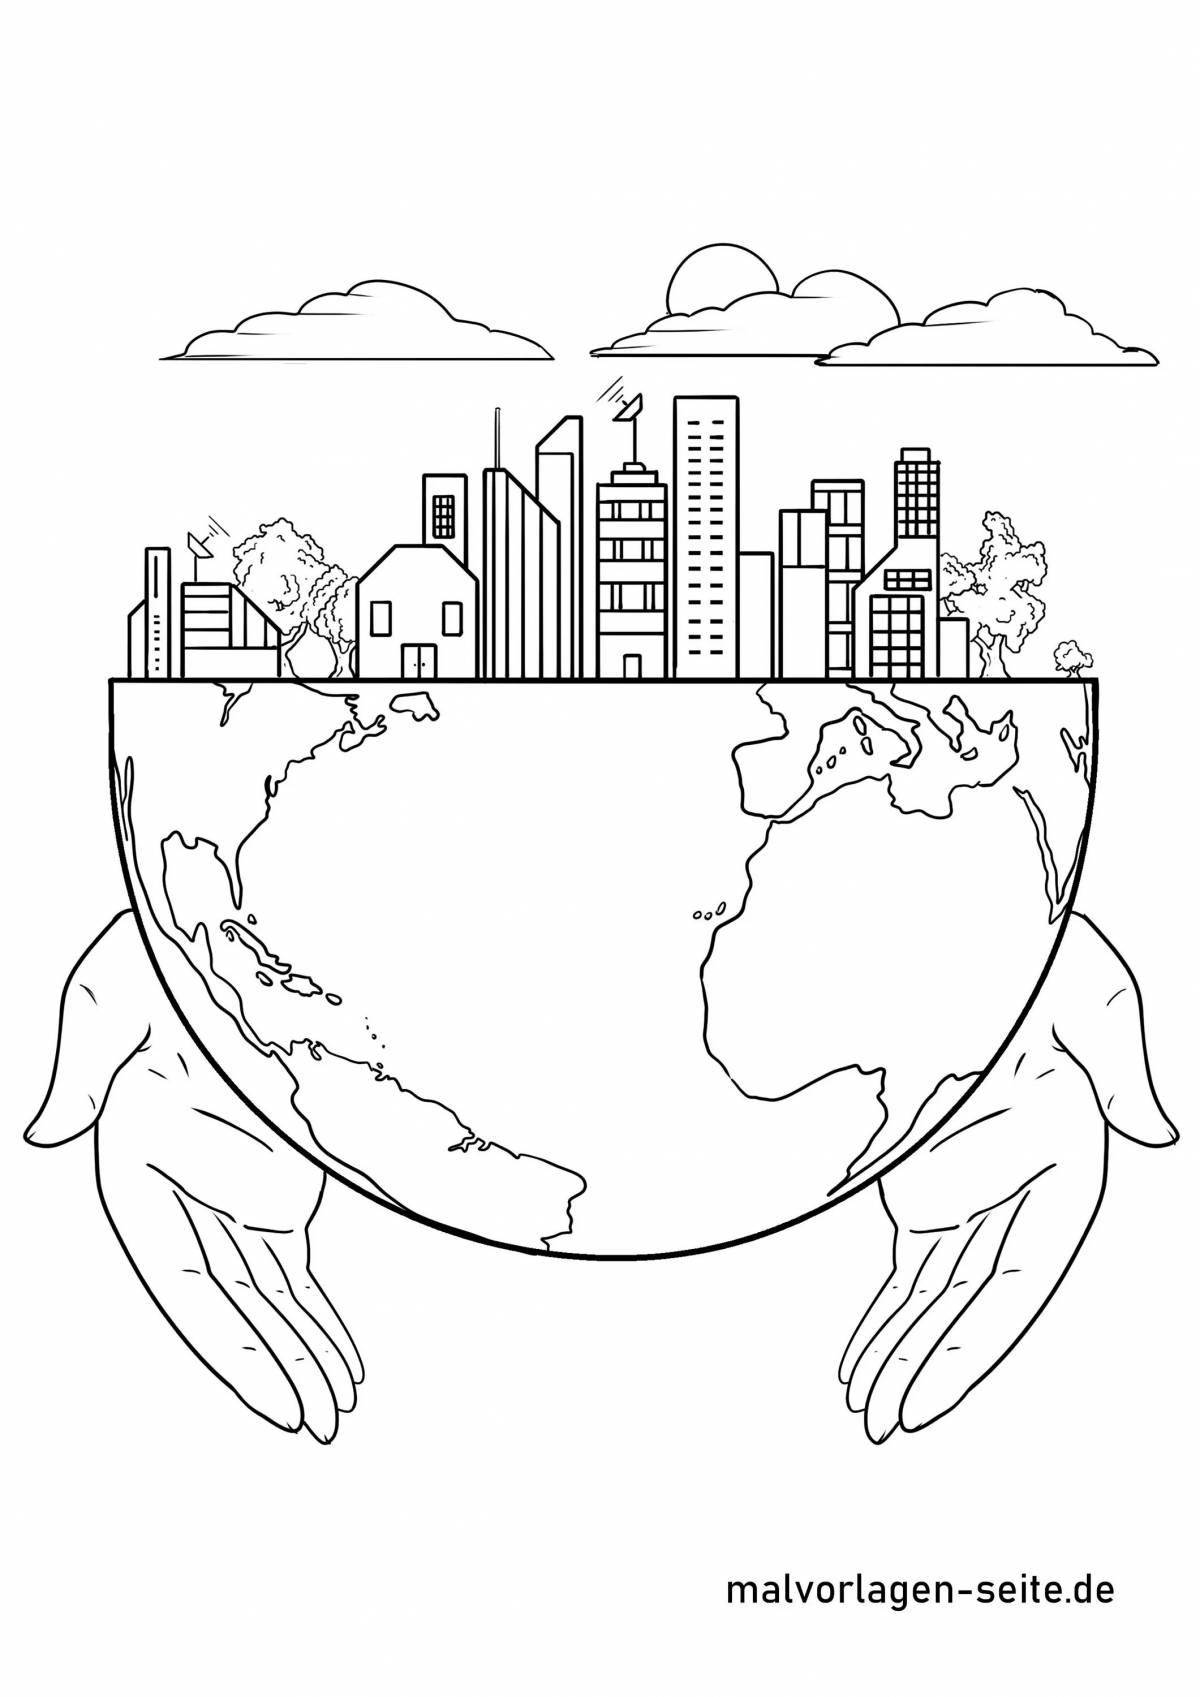 Exciting save nature poster coloring page